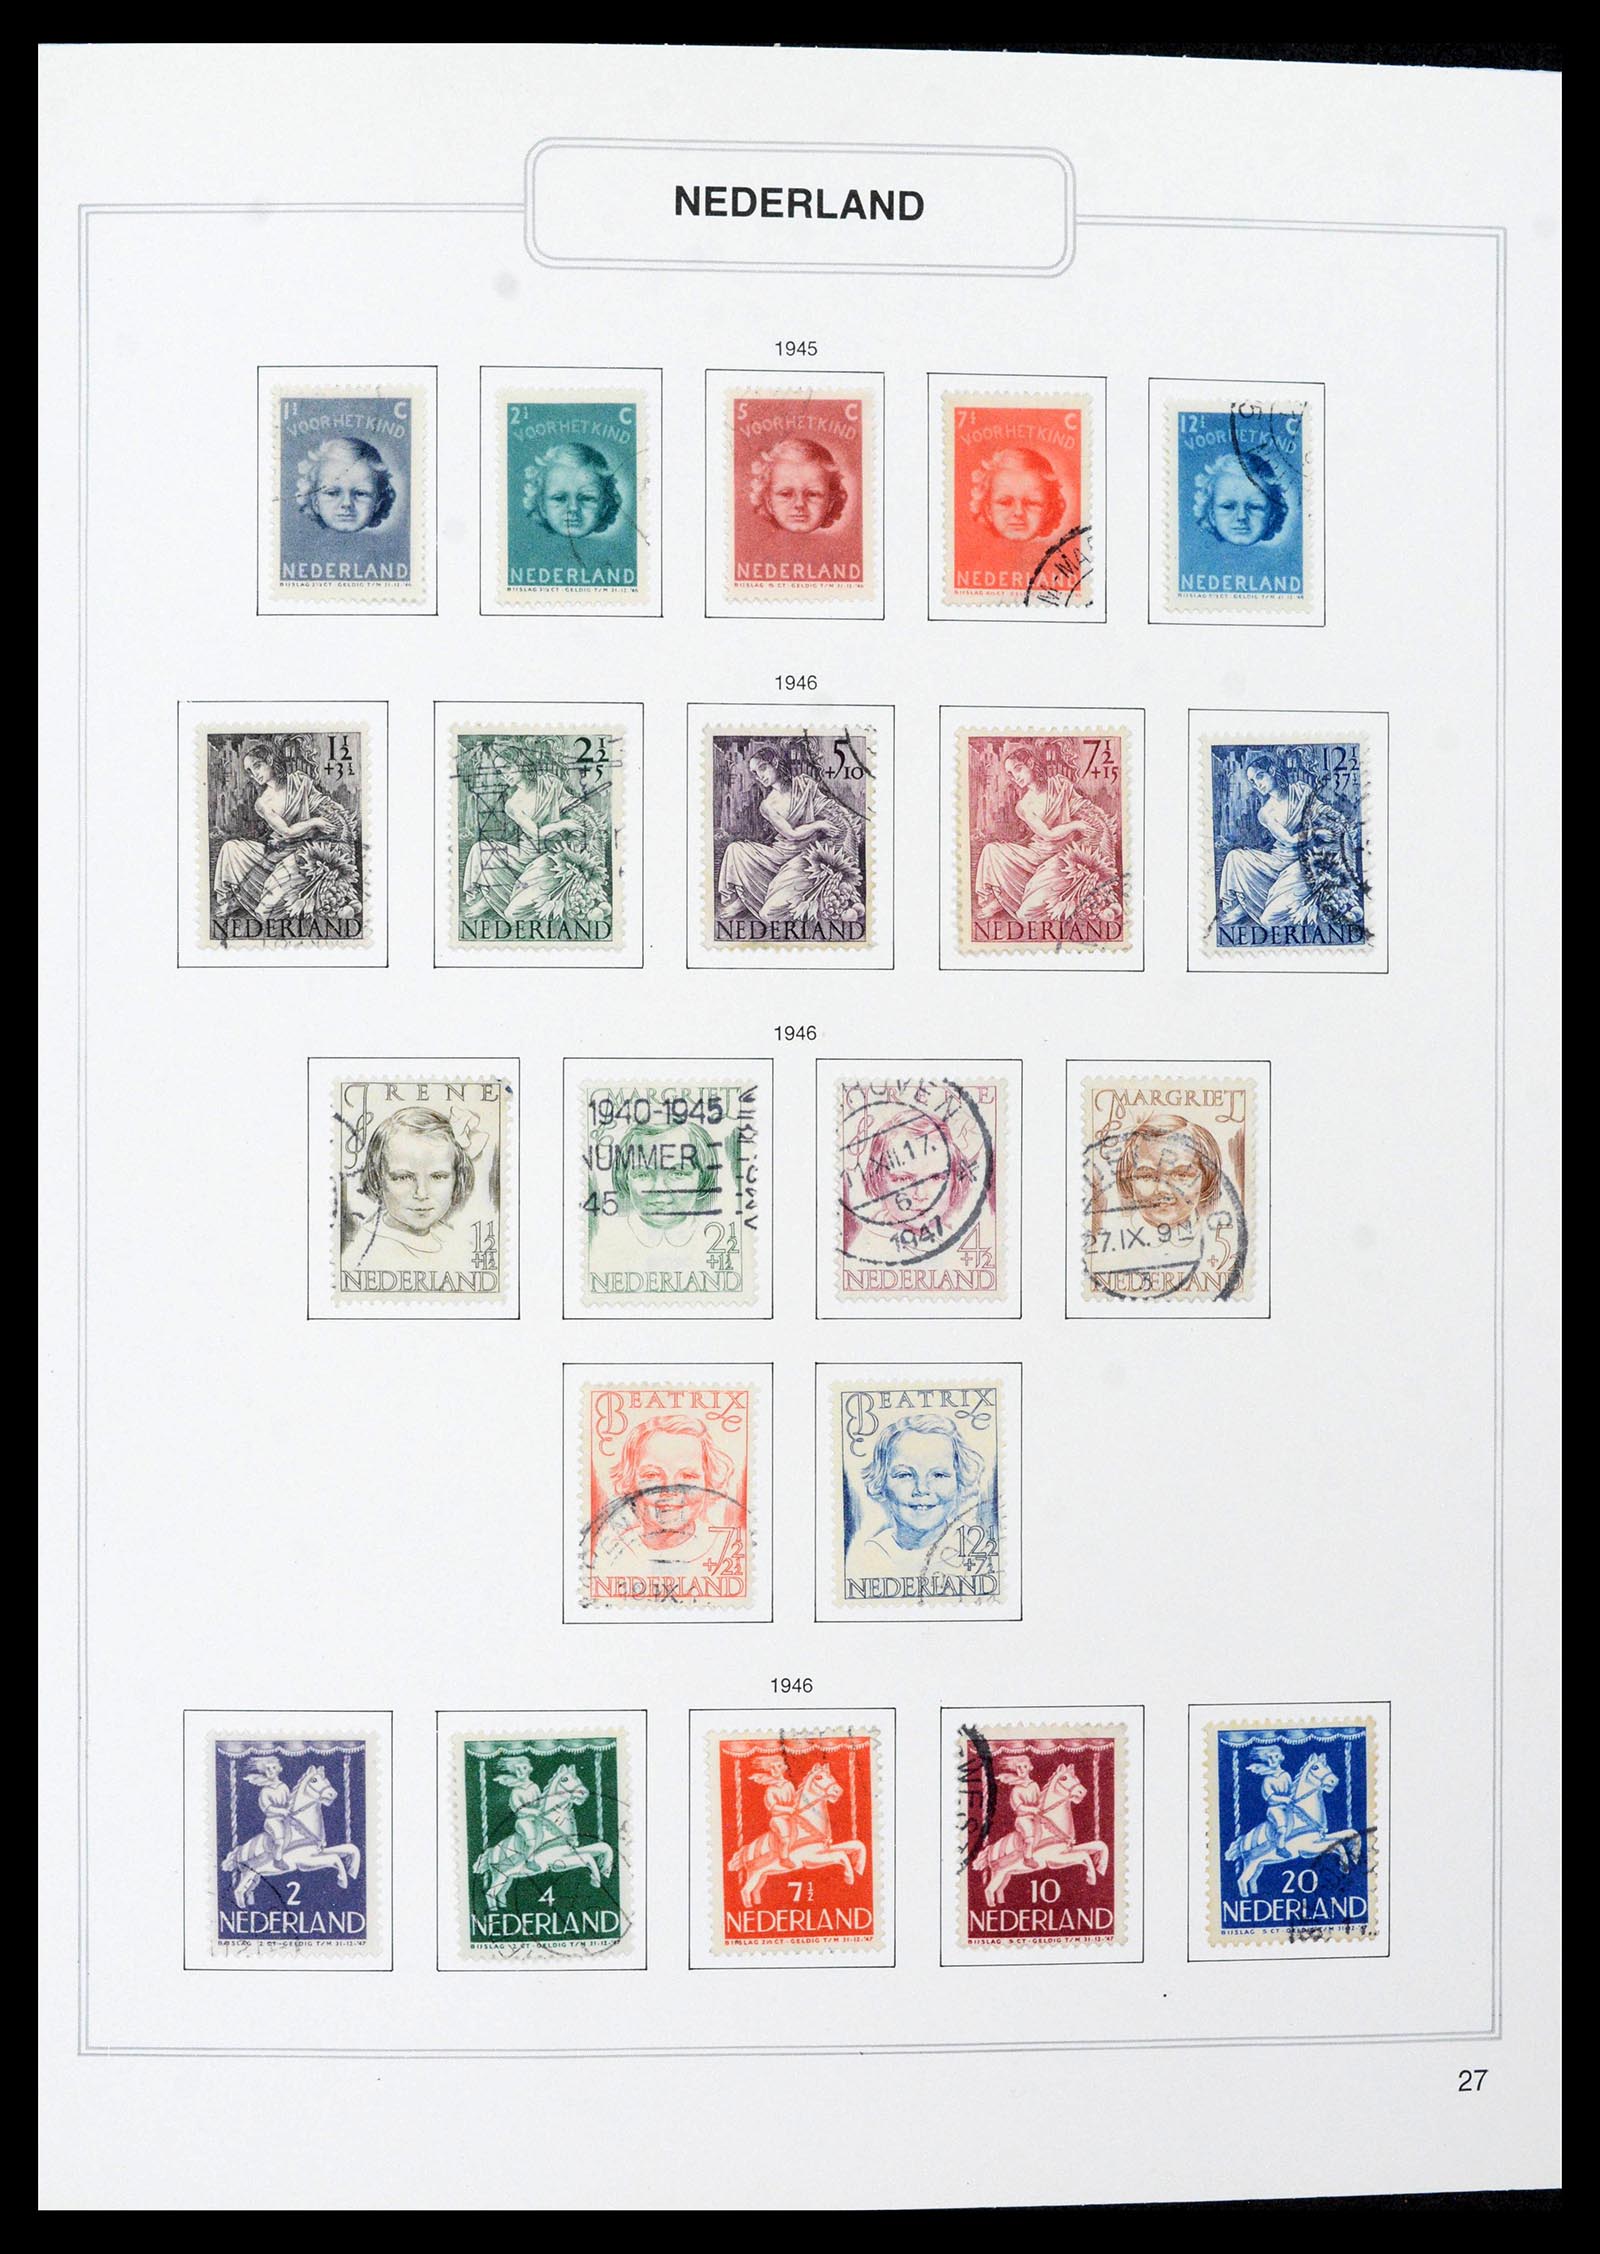 39261 0027 - Stamp collection 39261 Netherlands 1852-2015.